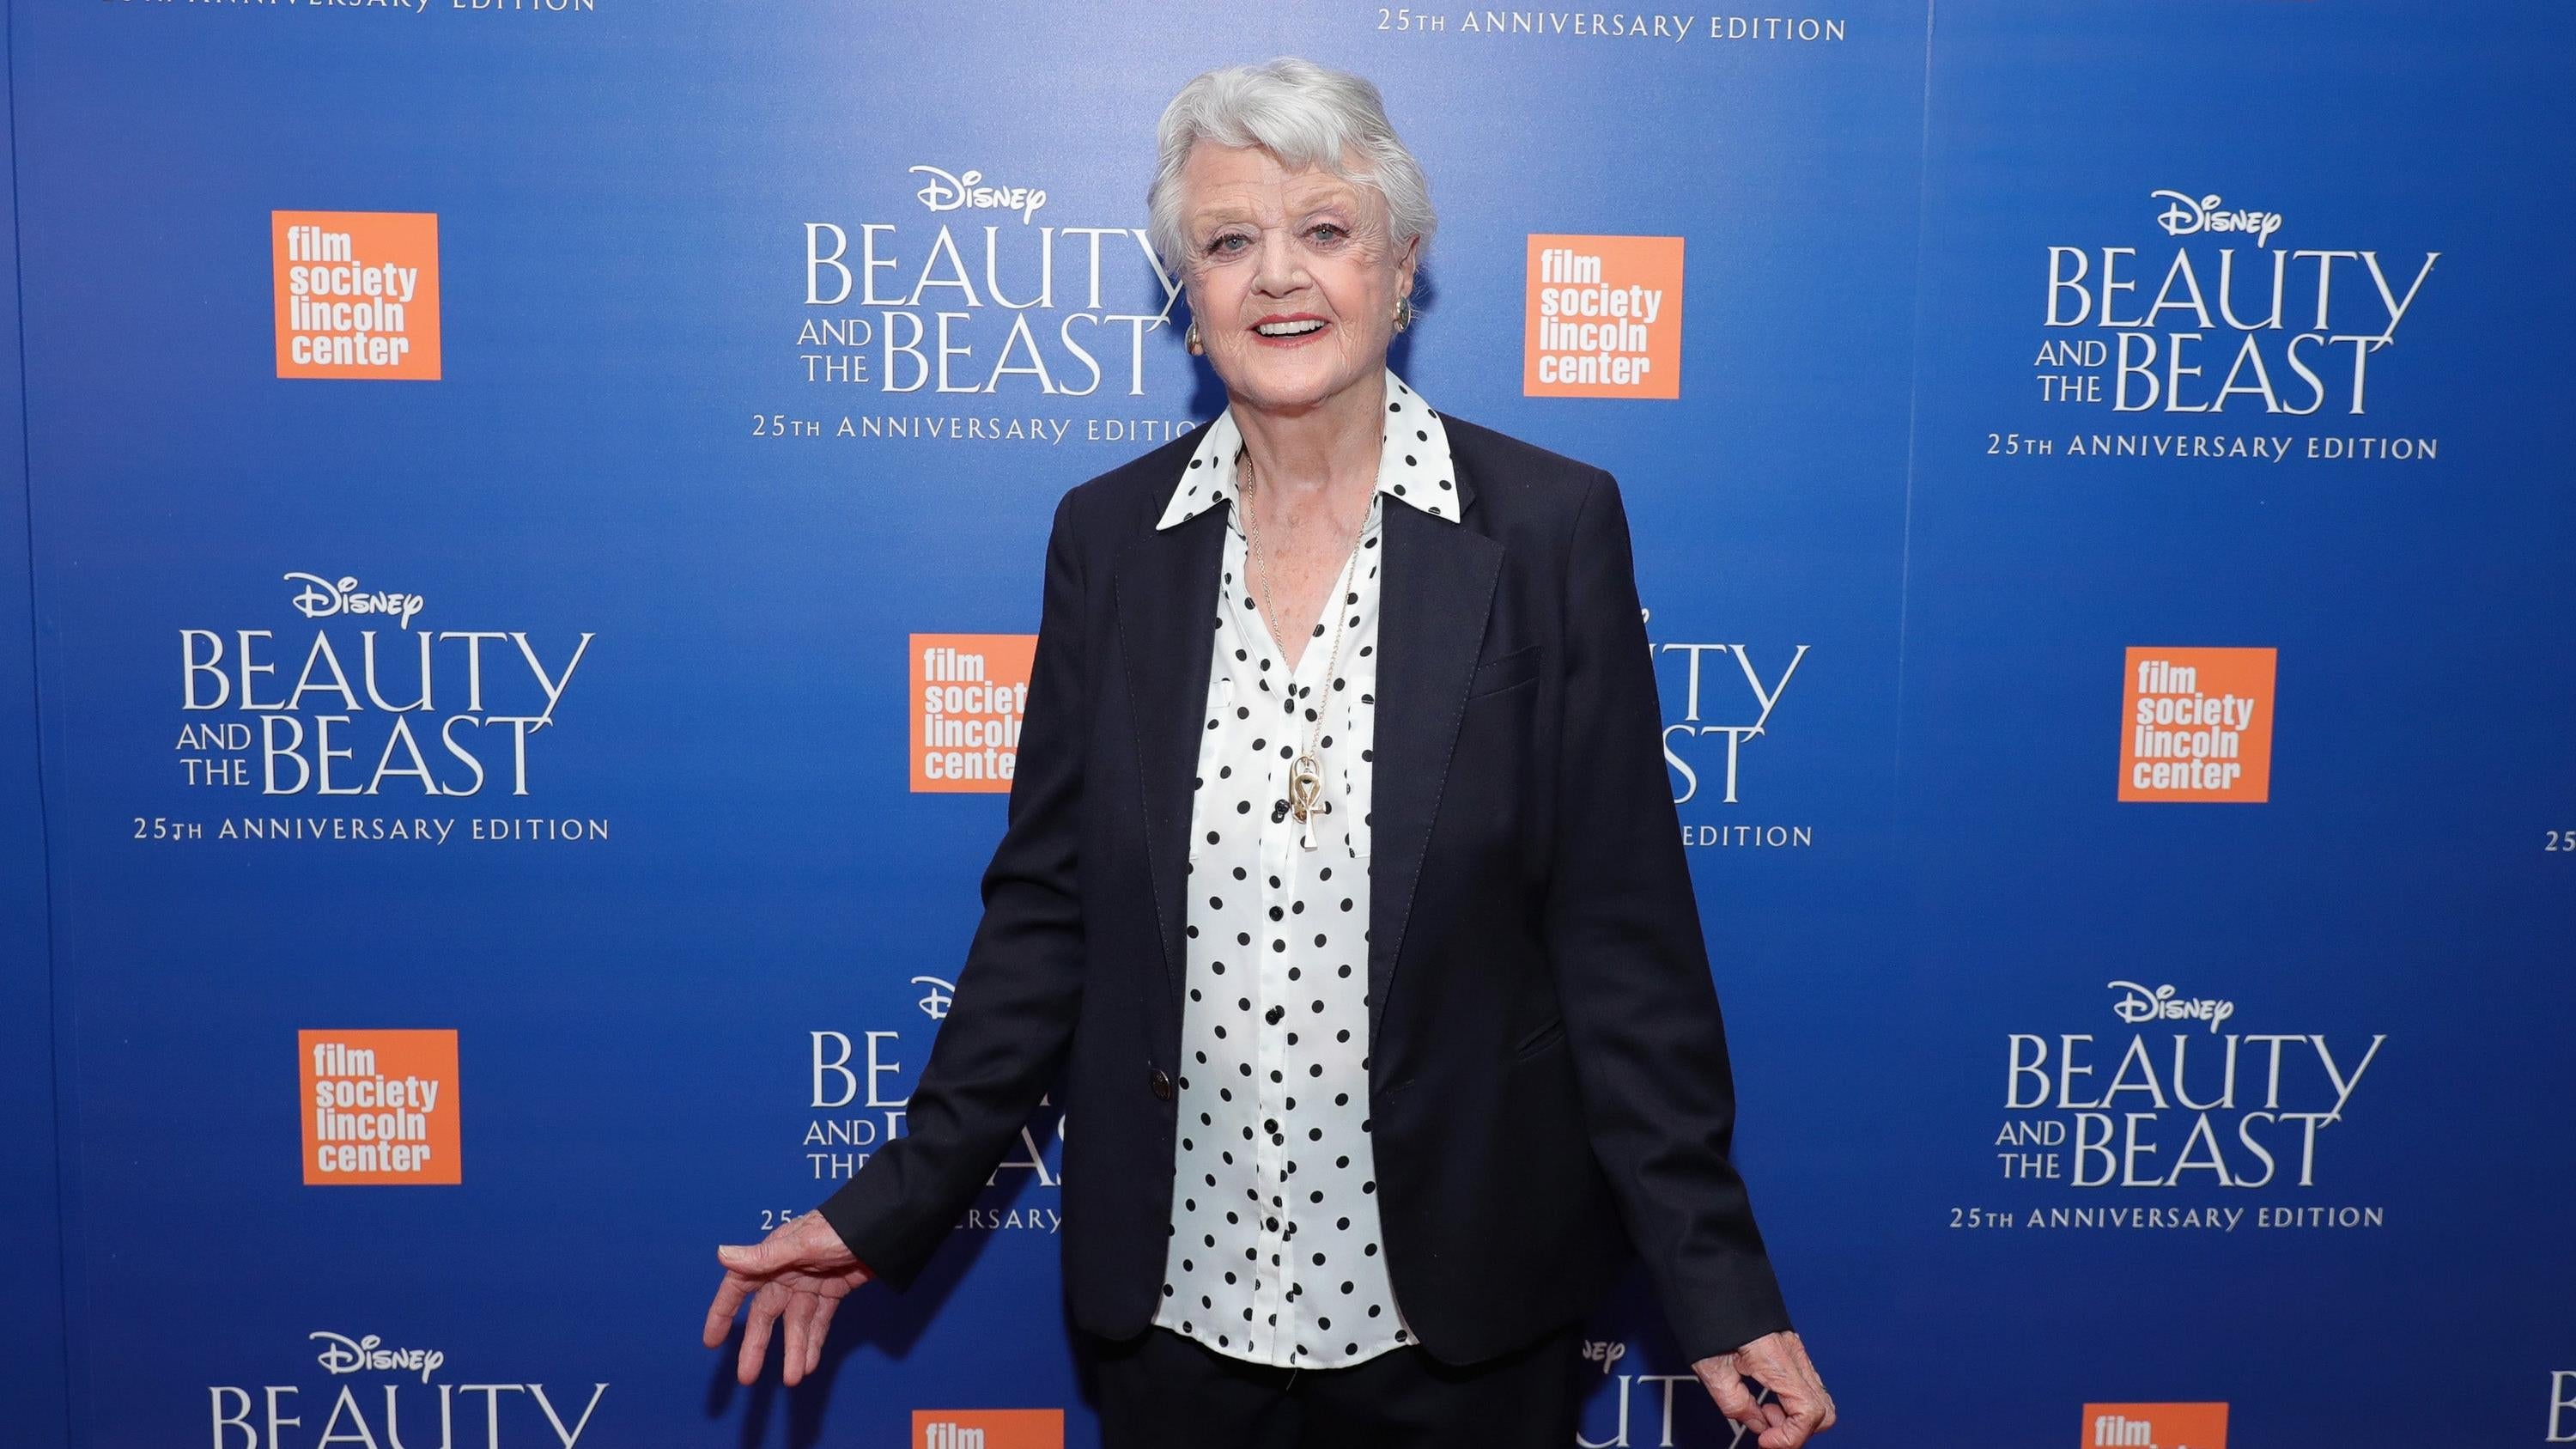 Angela Lansbury attends a special screening of Disney's Beauty and the Beast to celebrate the 25th Anniversary Edition release on September 18, 2016 in New York City.  (Photo: Neilson Barnard/Getty Images for Walt Disney Studios Home Entertainment, Getty Images)